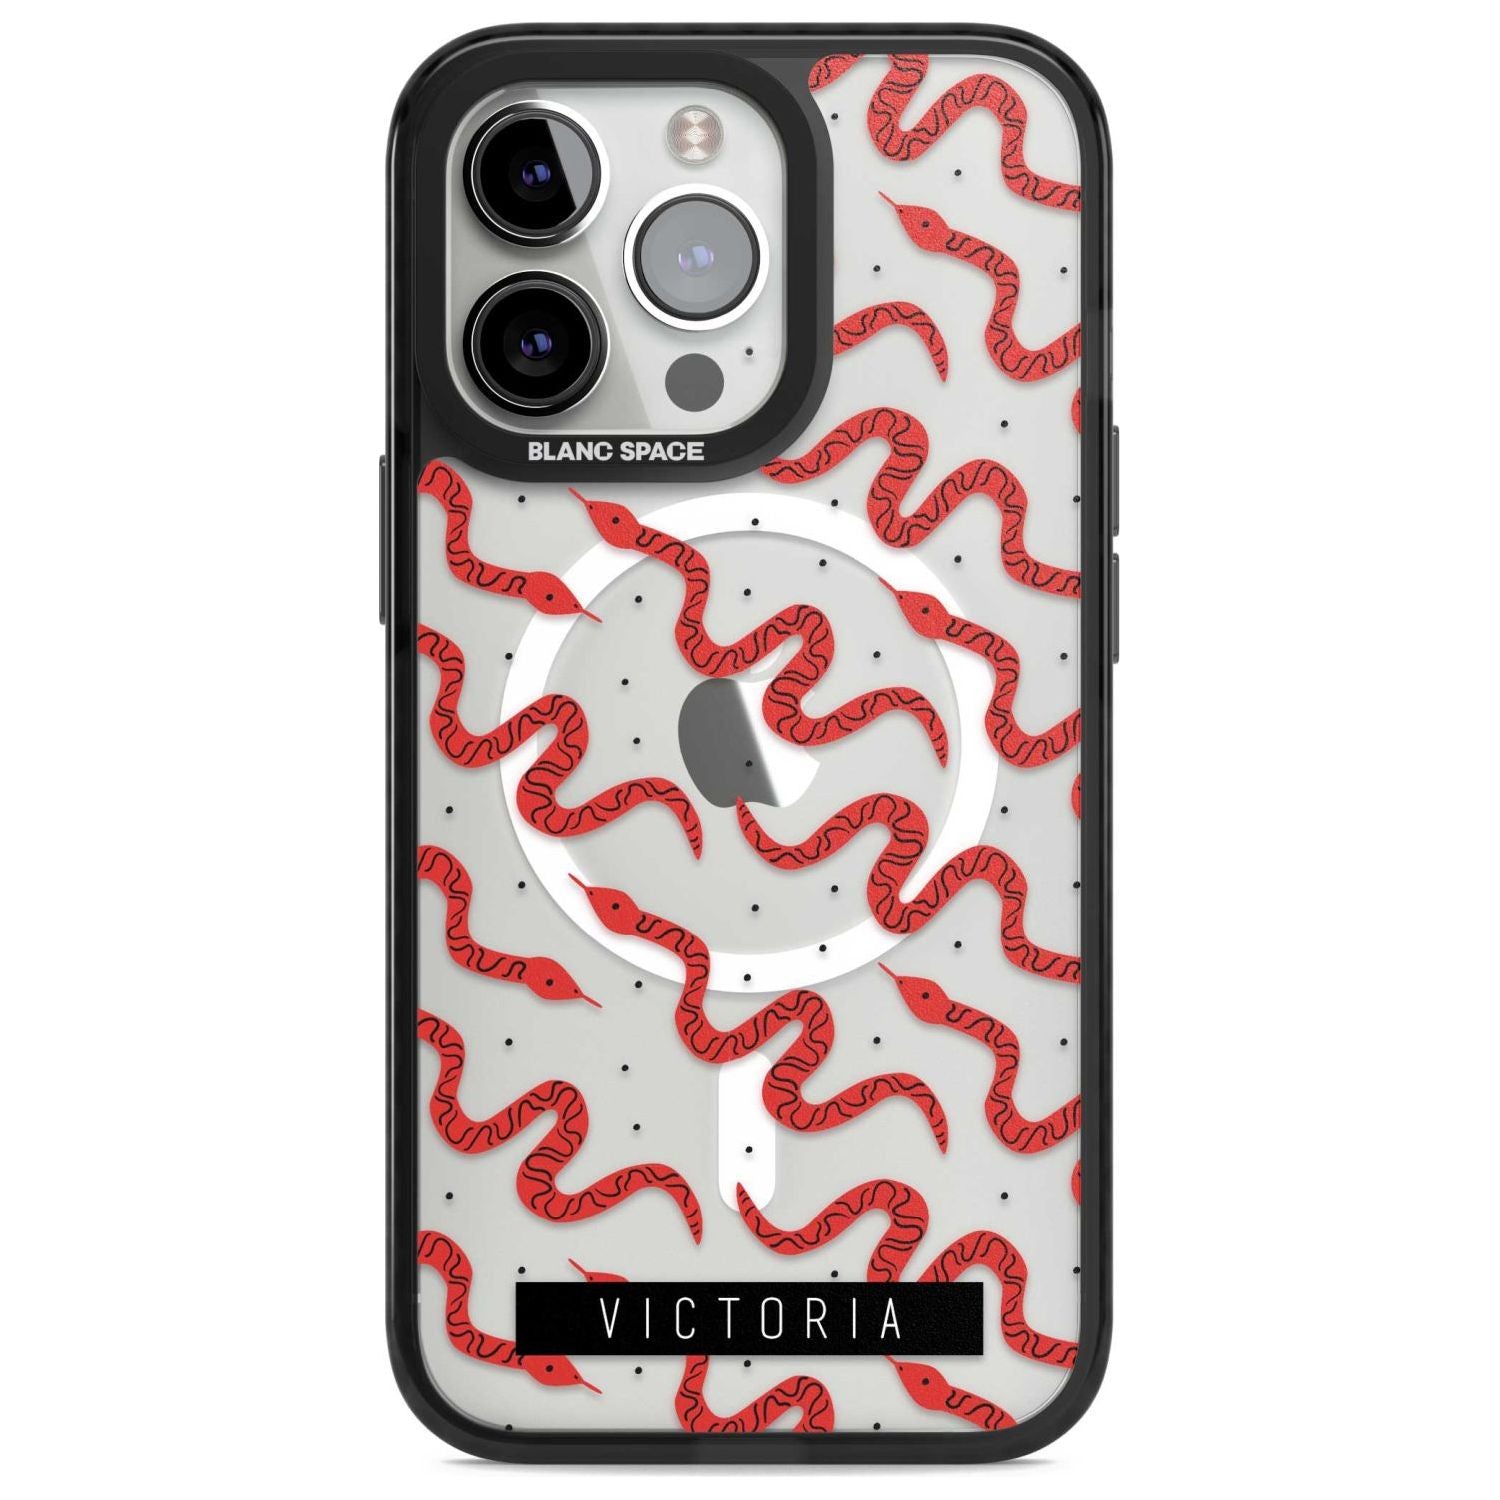 Personalised Snake Pattern Custom Phone Case iPhone 15 Pro Max / Magsafe Black Impact Case,iPhone 15 Pro / Magsafe Black Impact Case,iPhone 14 Pro Max / Magsafe Black Impact Case,iPhone 14 Pro / Magsafe Black Impact Case,iPhone 13 Pro / Magsafe Black Impact Case Blanc Space